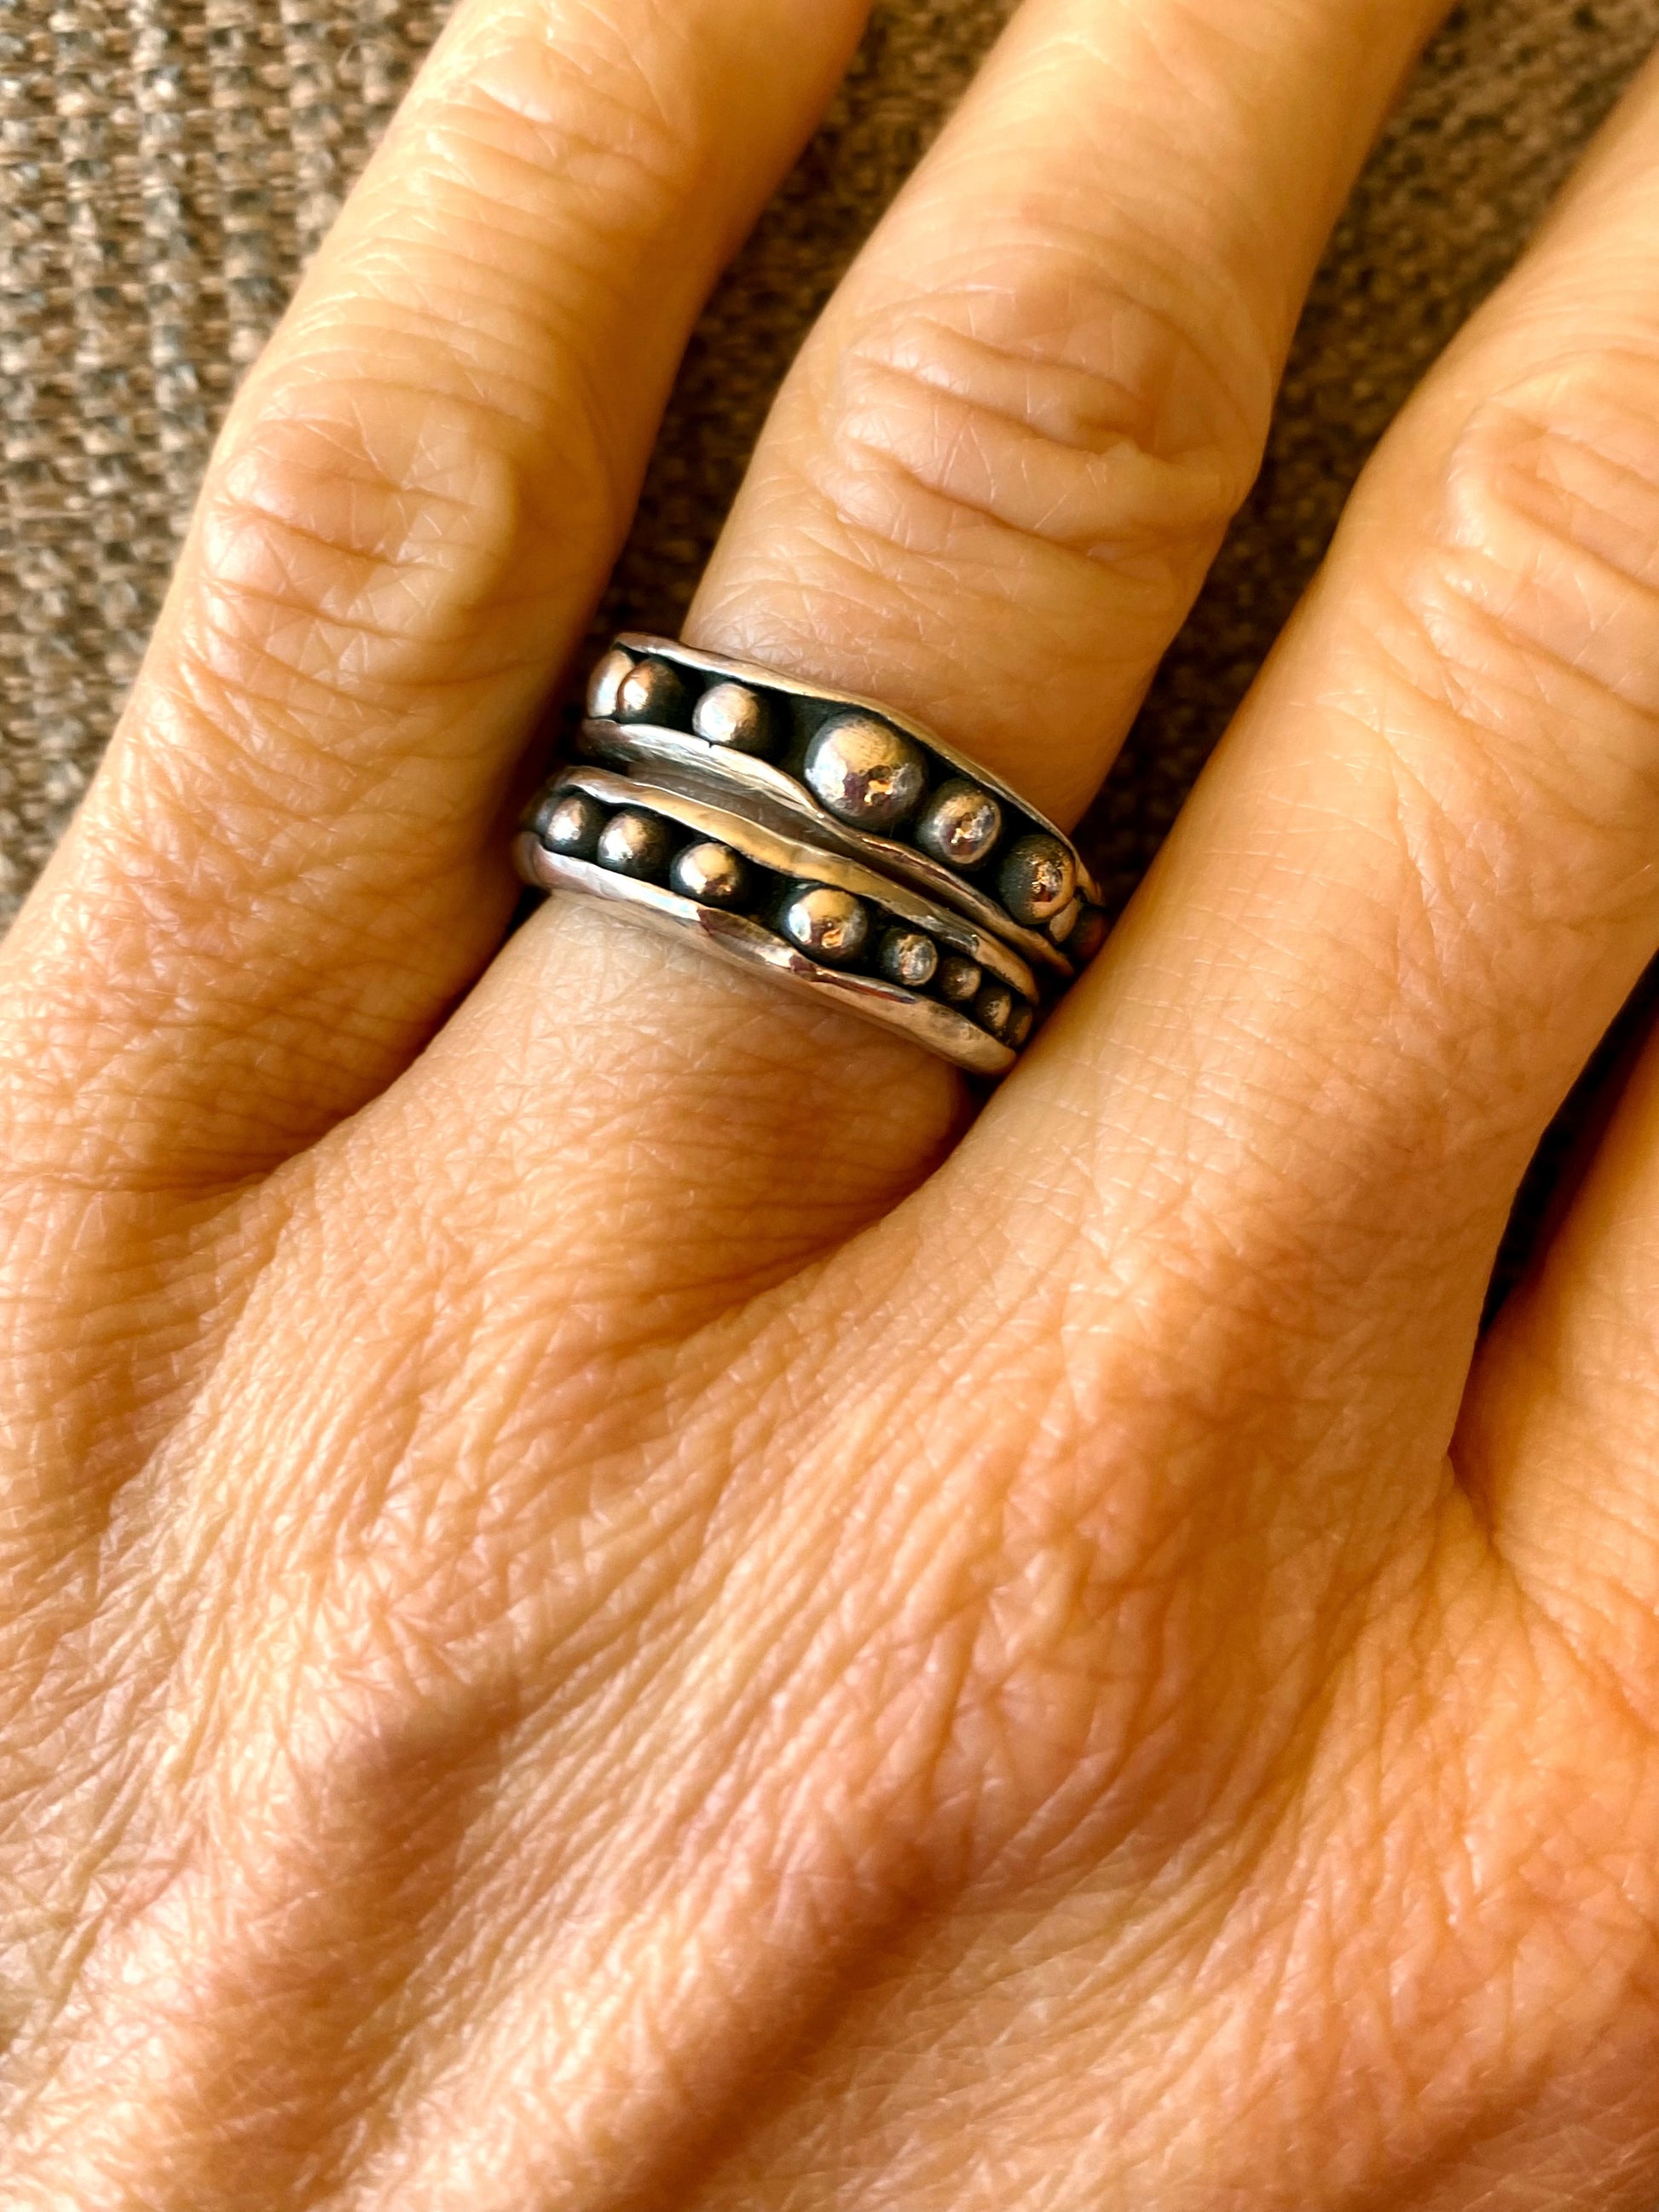 PEAPOD RING - One-of-a-kind hand-crafted sterling silver ring. Outer band wraps around interior sterling silver or antique bronze "peas." Can be ordered in any ring size. Style: rustic, boho, funky, organic, earthy yet elegant.